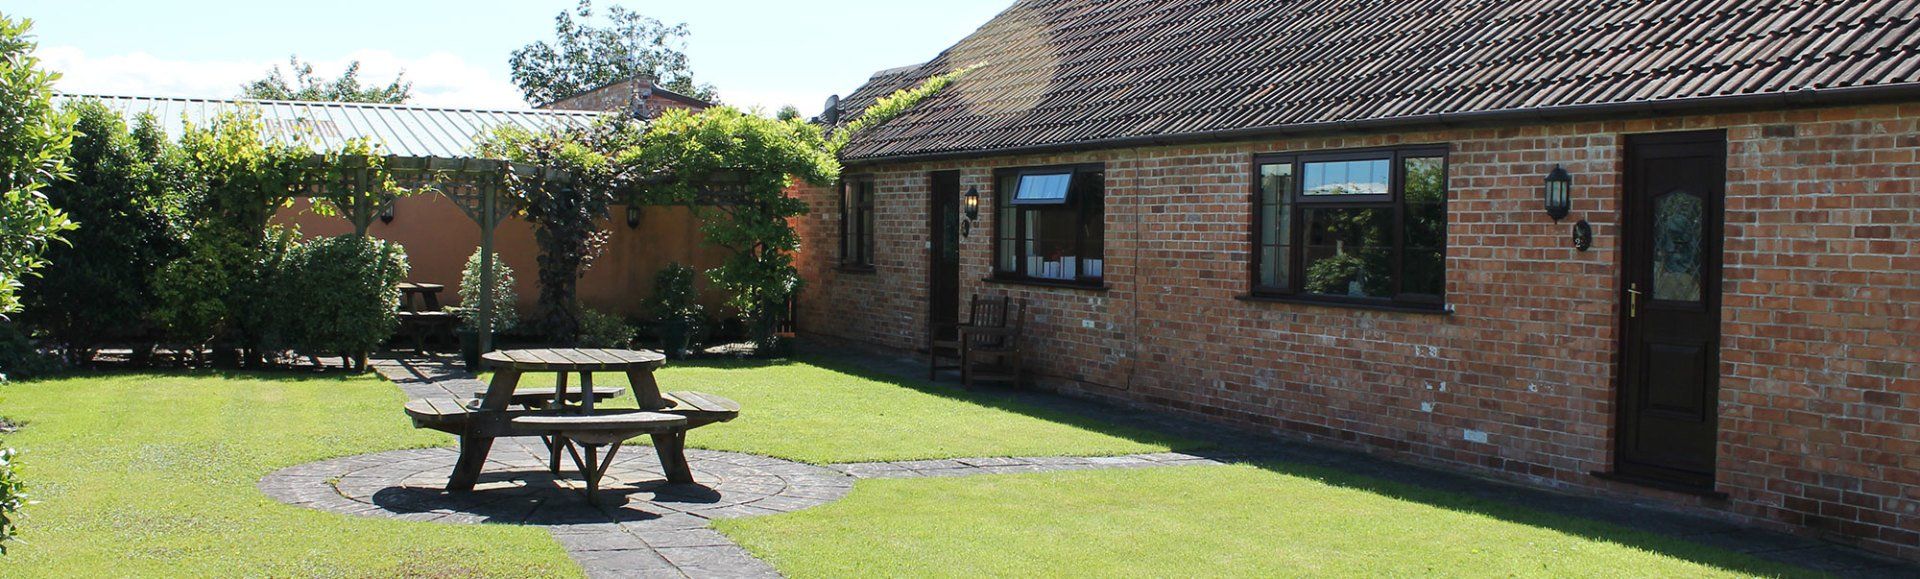 Timber holiday cottages in Burnham on Sea